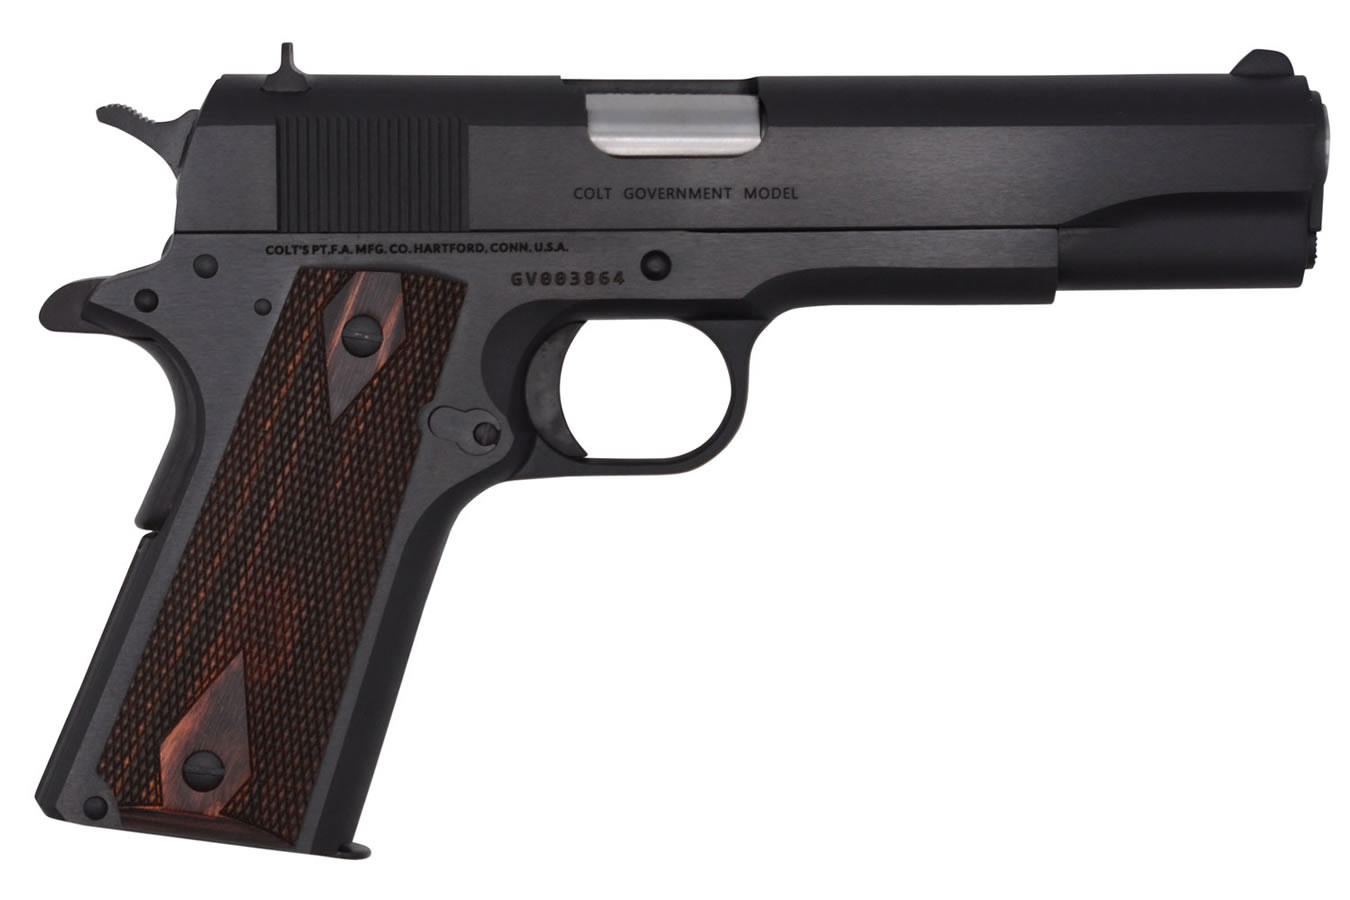 No. 20 Best Selling: COLT 1911 CLASSIC 45 ACP PISTOL WITH ROSEWOOD GRIPS